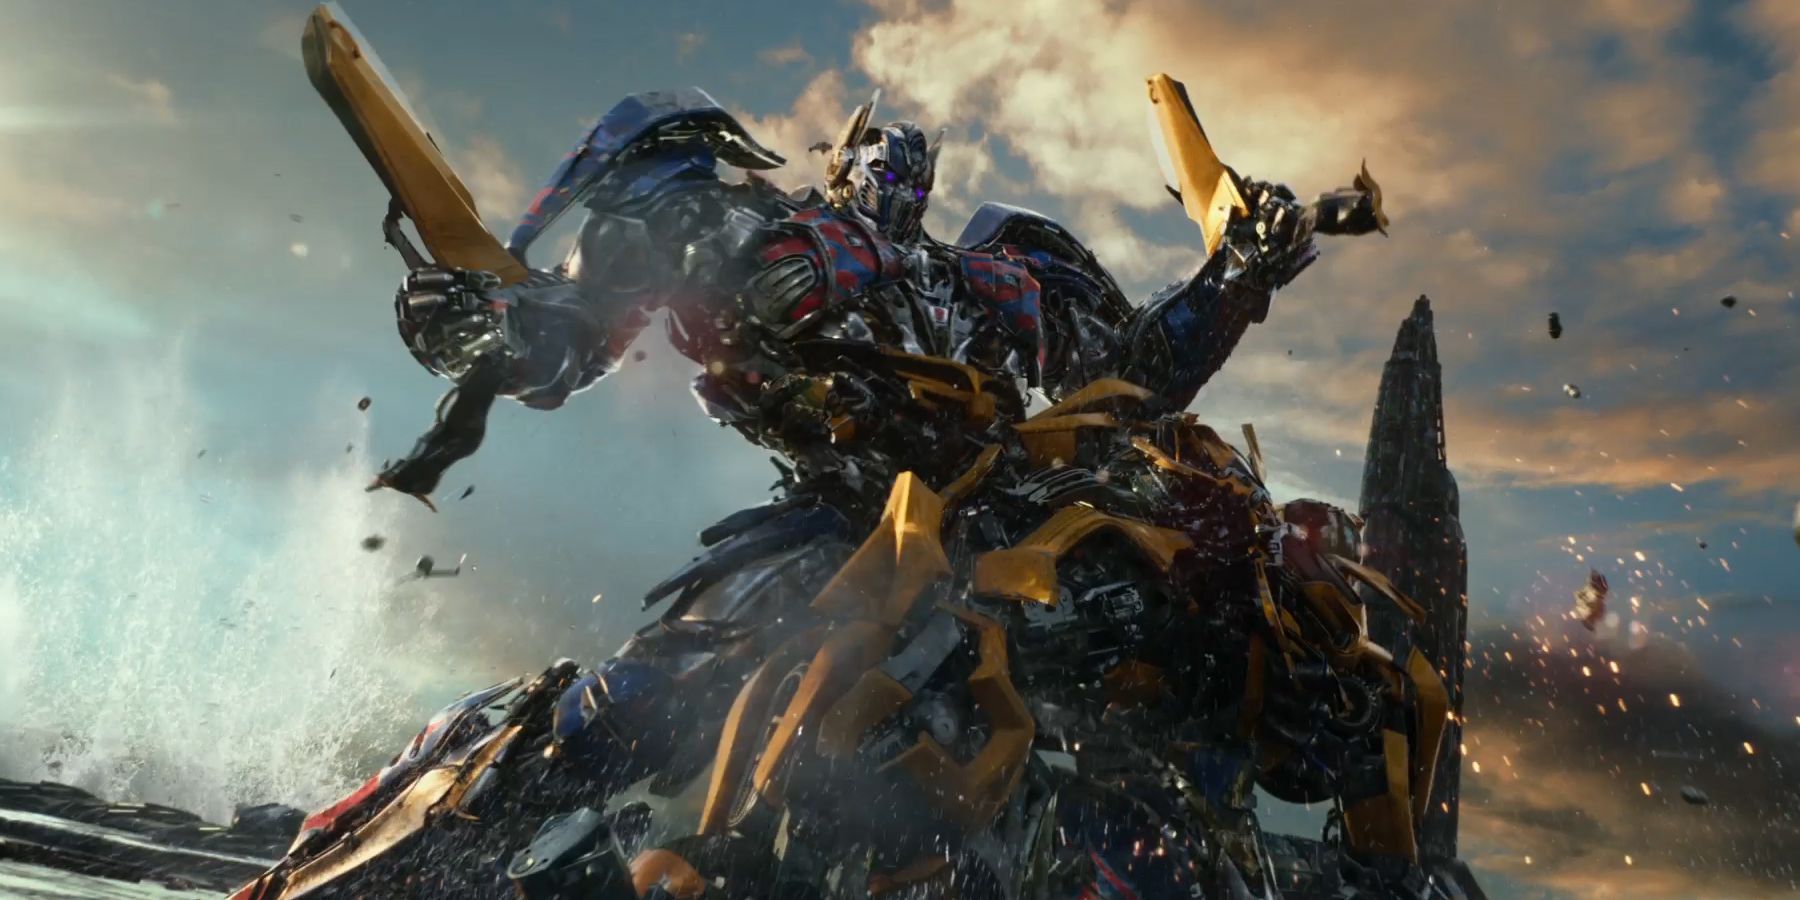 Transformers The Last Knight - Optimus-Bumblebee fight